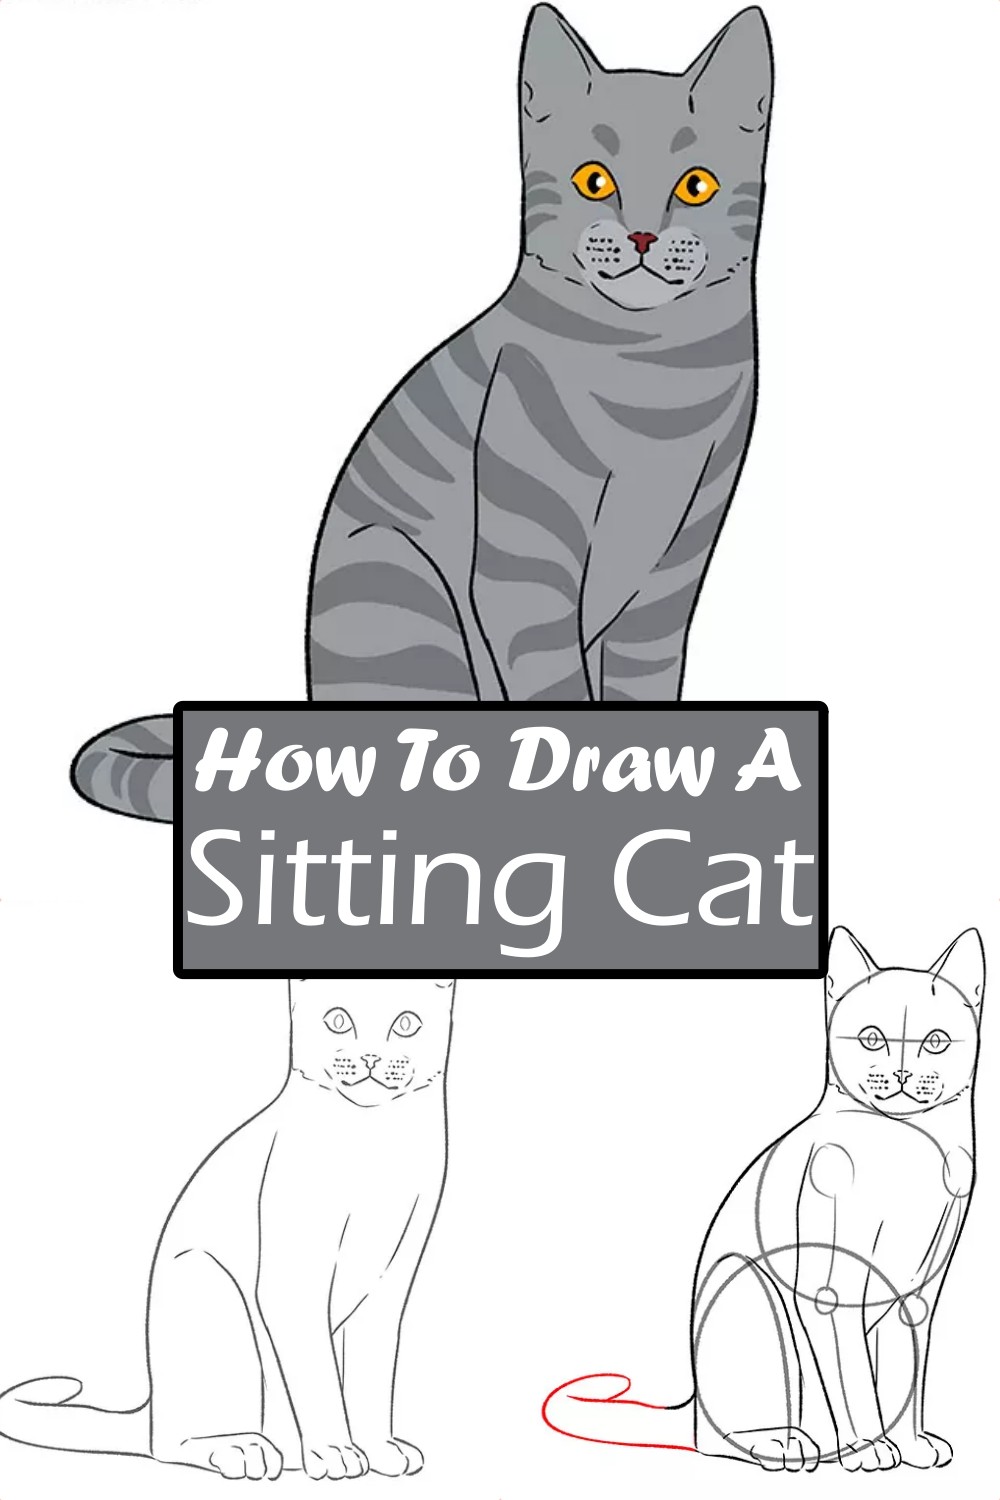 How To Draw A Sitting Cat